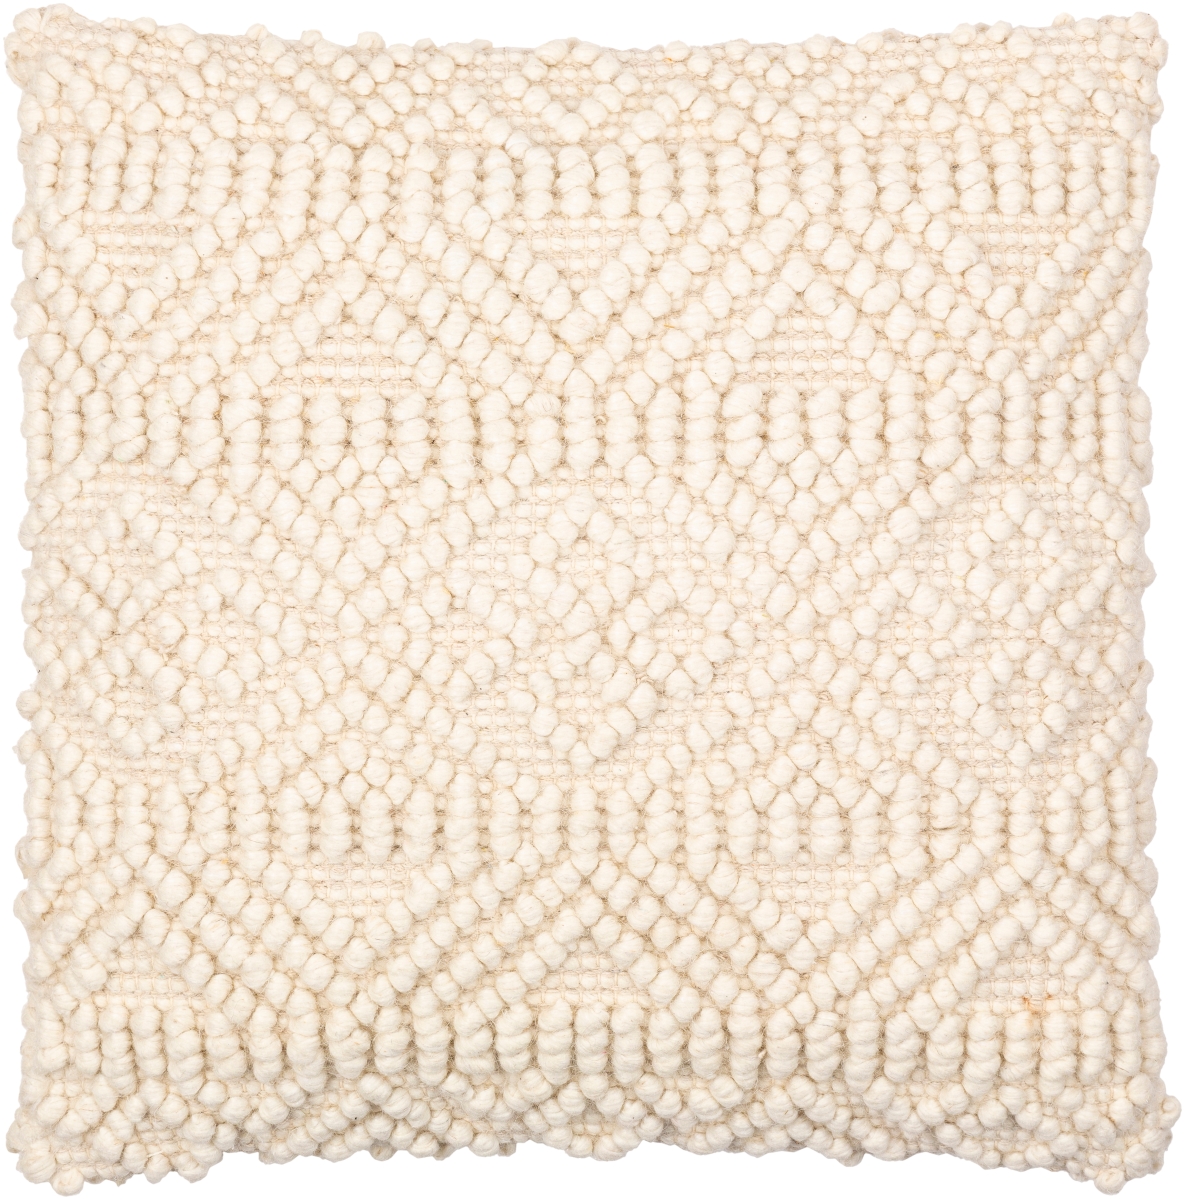 Picture of Livabliss HYG004-2020P 20 x 20 in. Hygge Square Pillow Cover, Cream - Polyester Insert